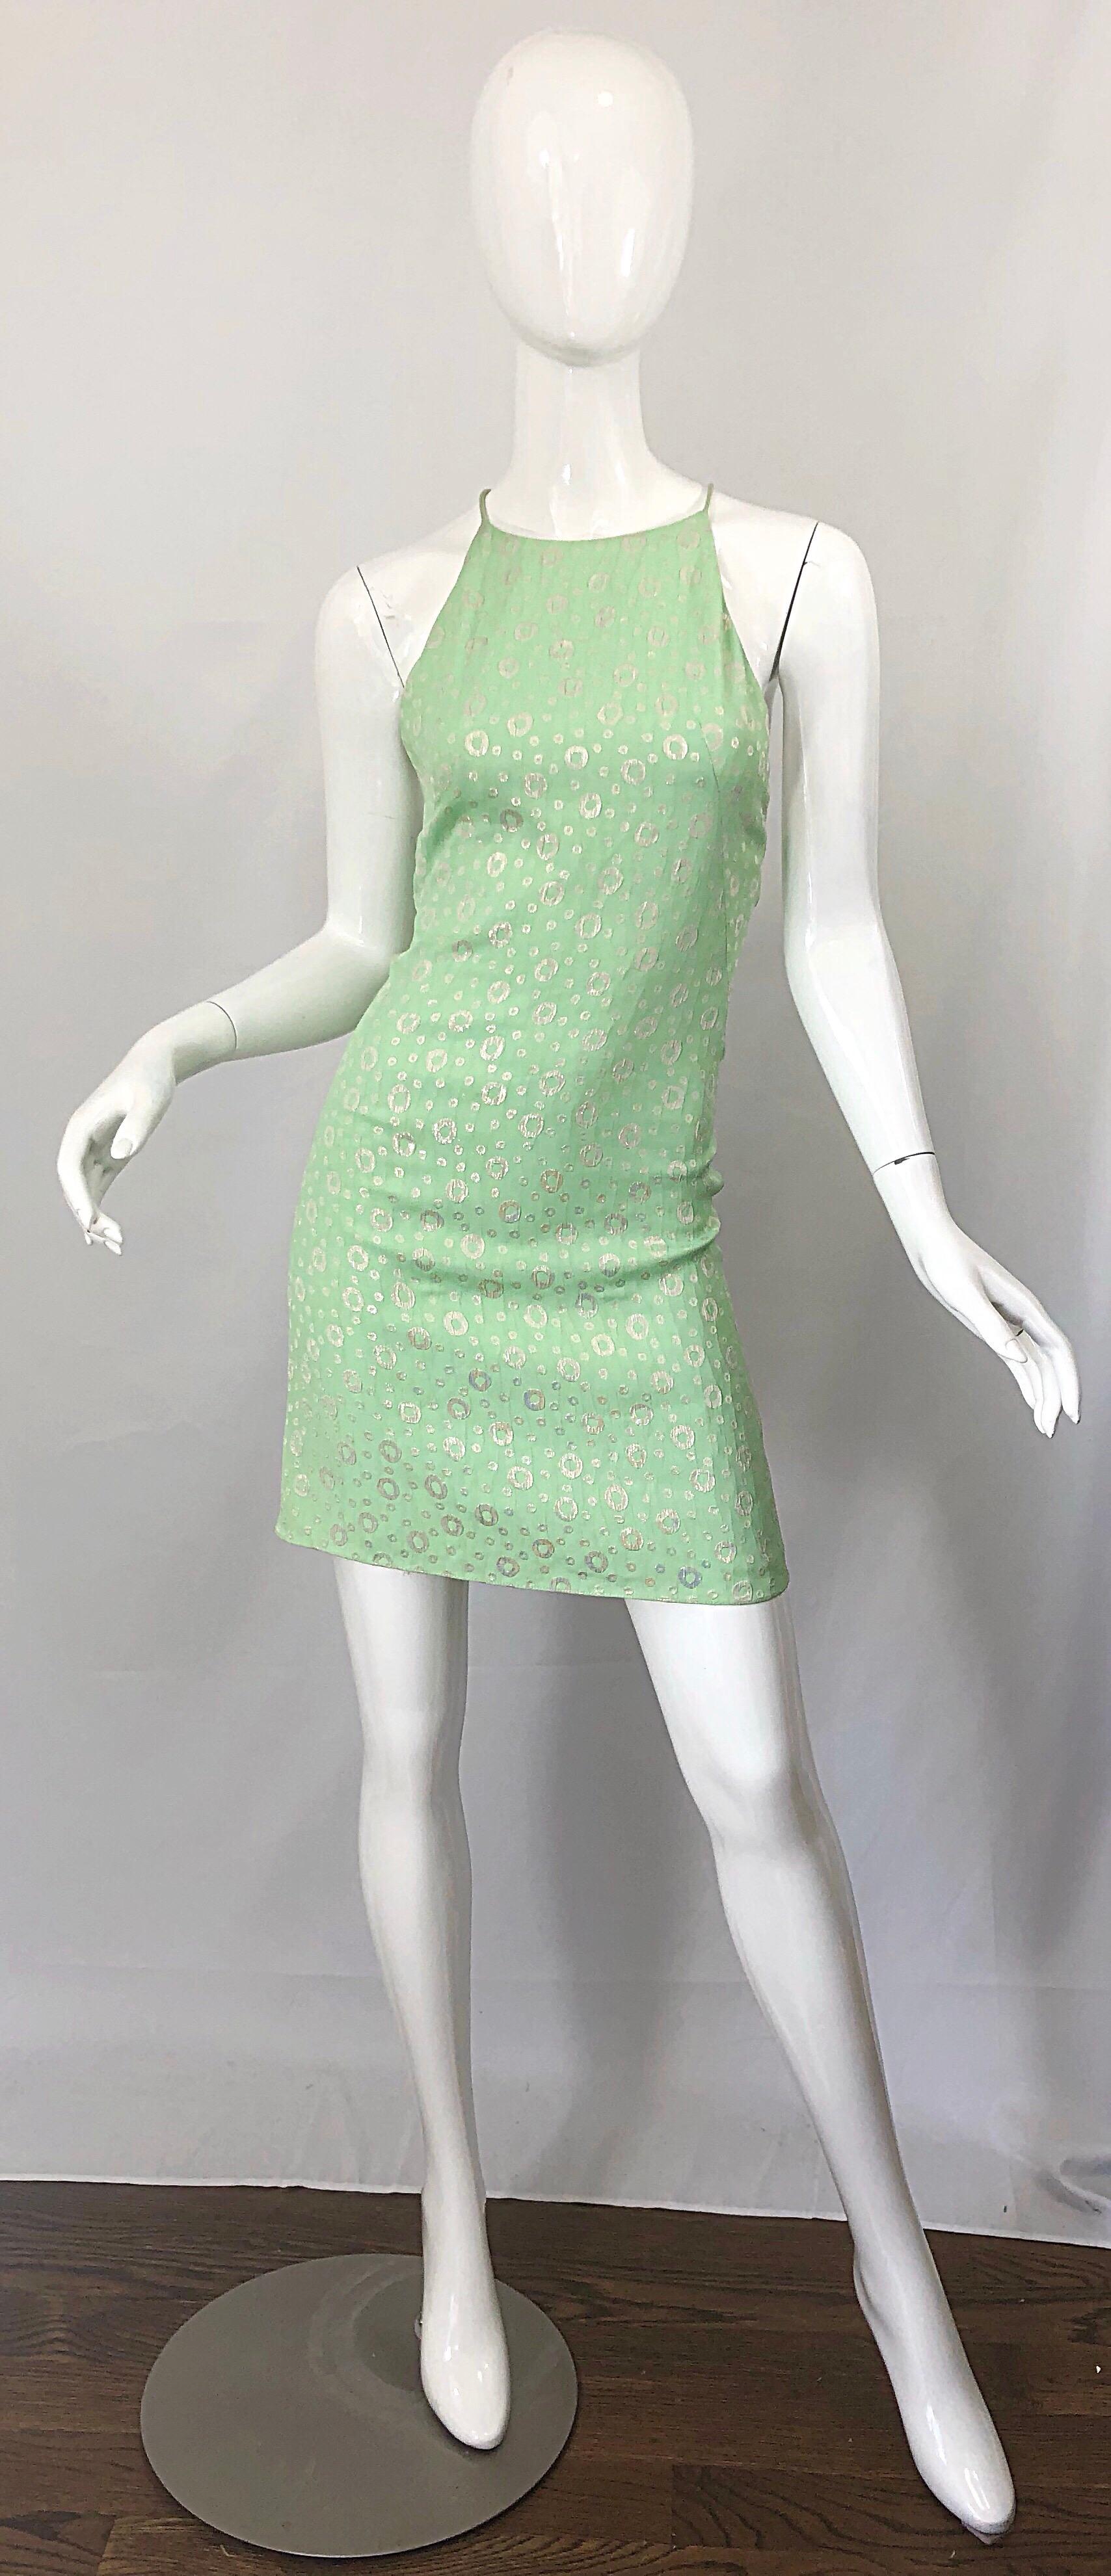 Chic brand new with tags ( NWT ) JAMES PURCELL couture quality silk sherbert mint green and gold silk racer back mini dress! Features a luxurious silk, with plastic pvc covered clear racerback straps. Hidden zipper up the back with hook-and-eye